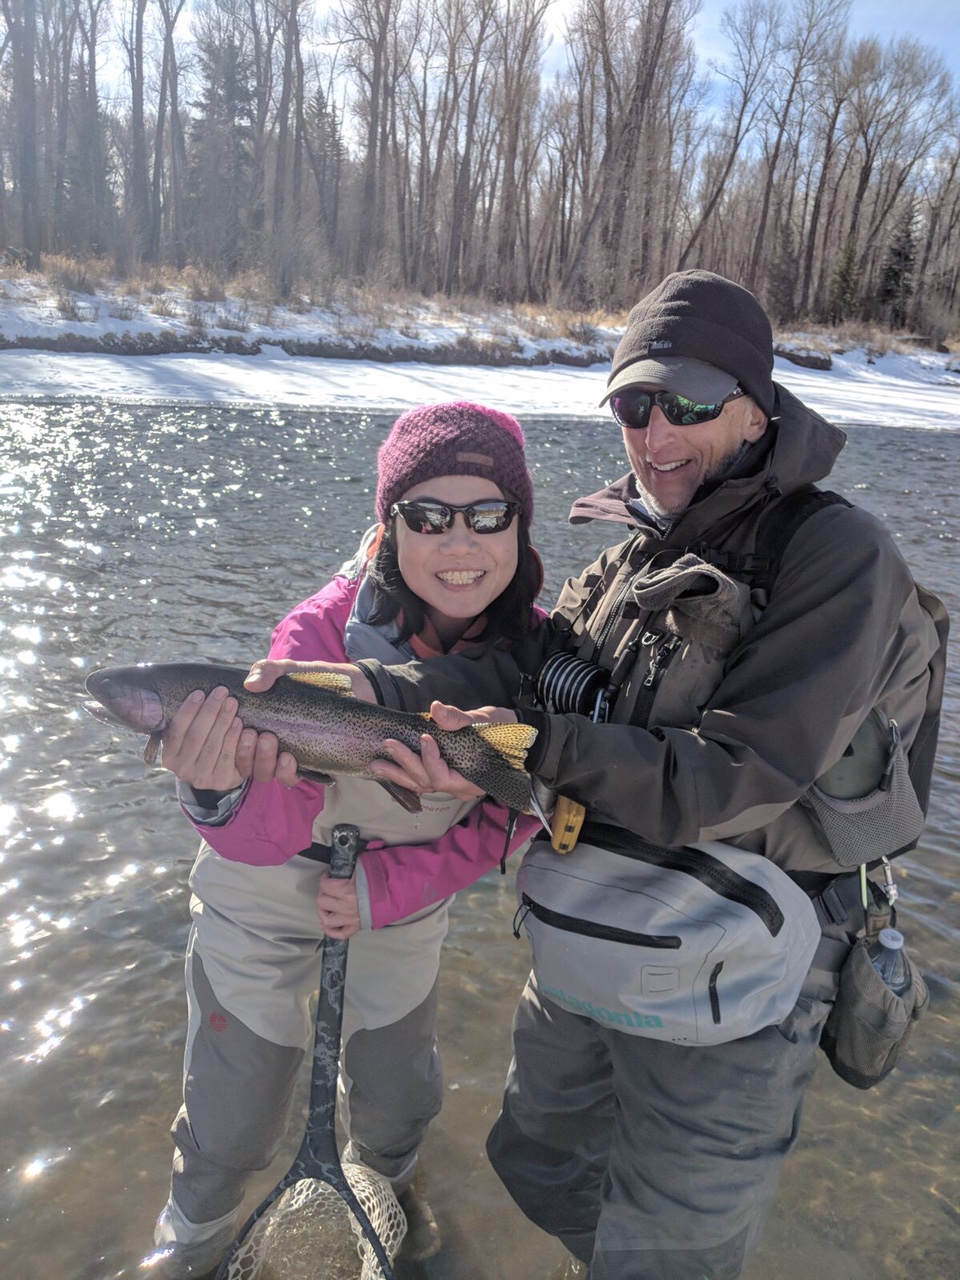 STAY WARM OUT THERE – How to be Comfortable when Fishing in Cold Weather